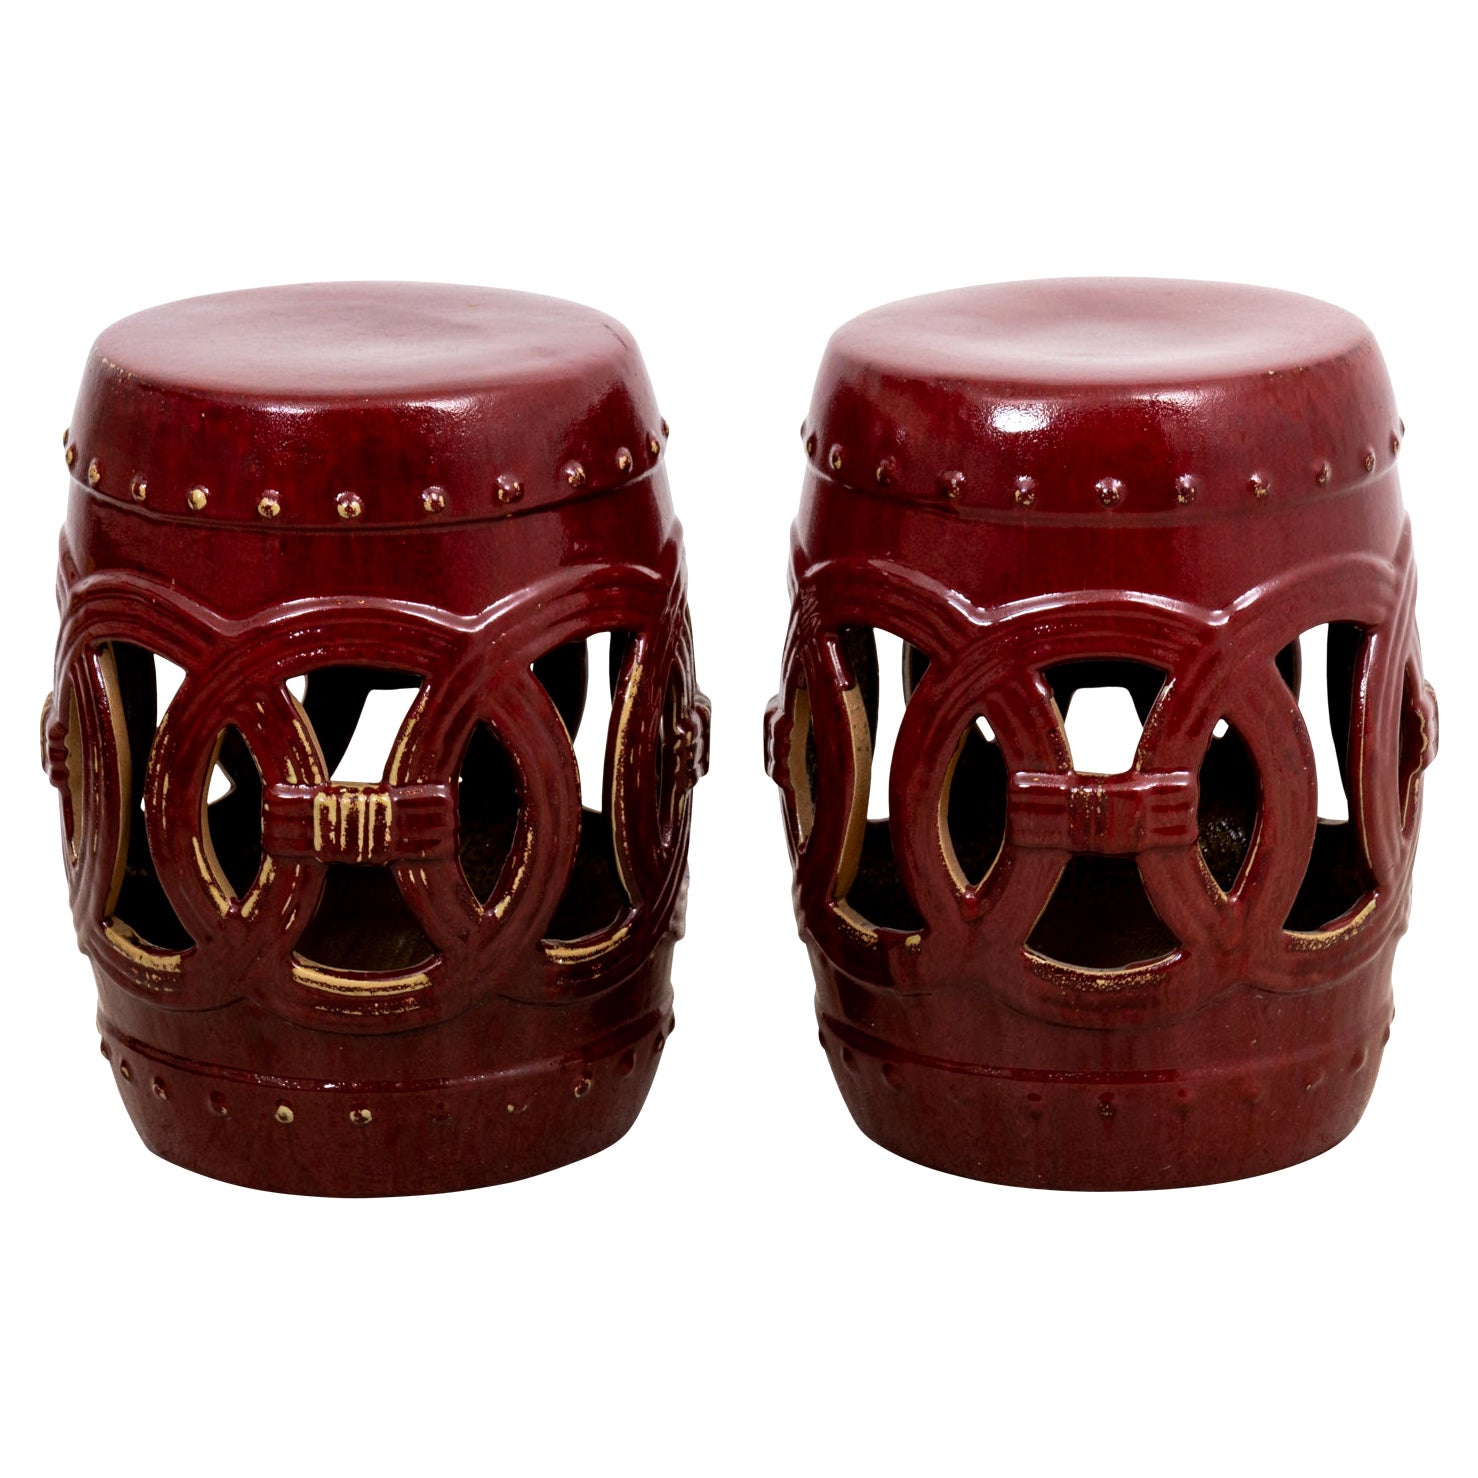 Pair of Vintage Burgundy Chinese Garden Seats For Sale